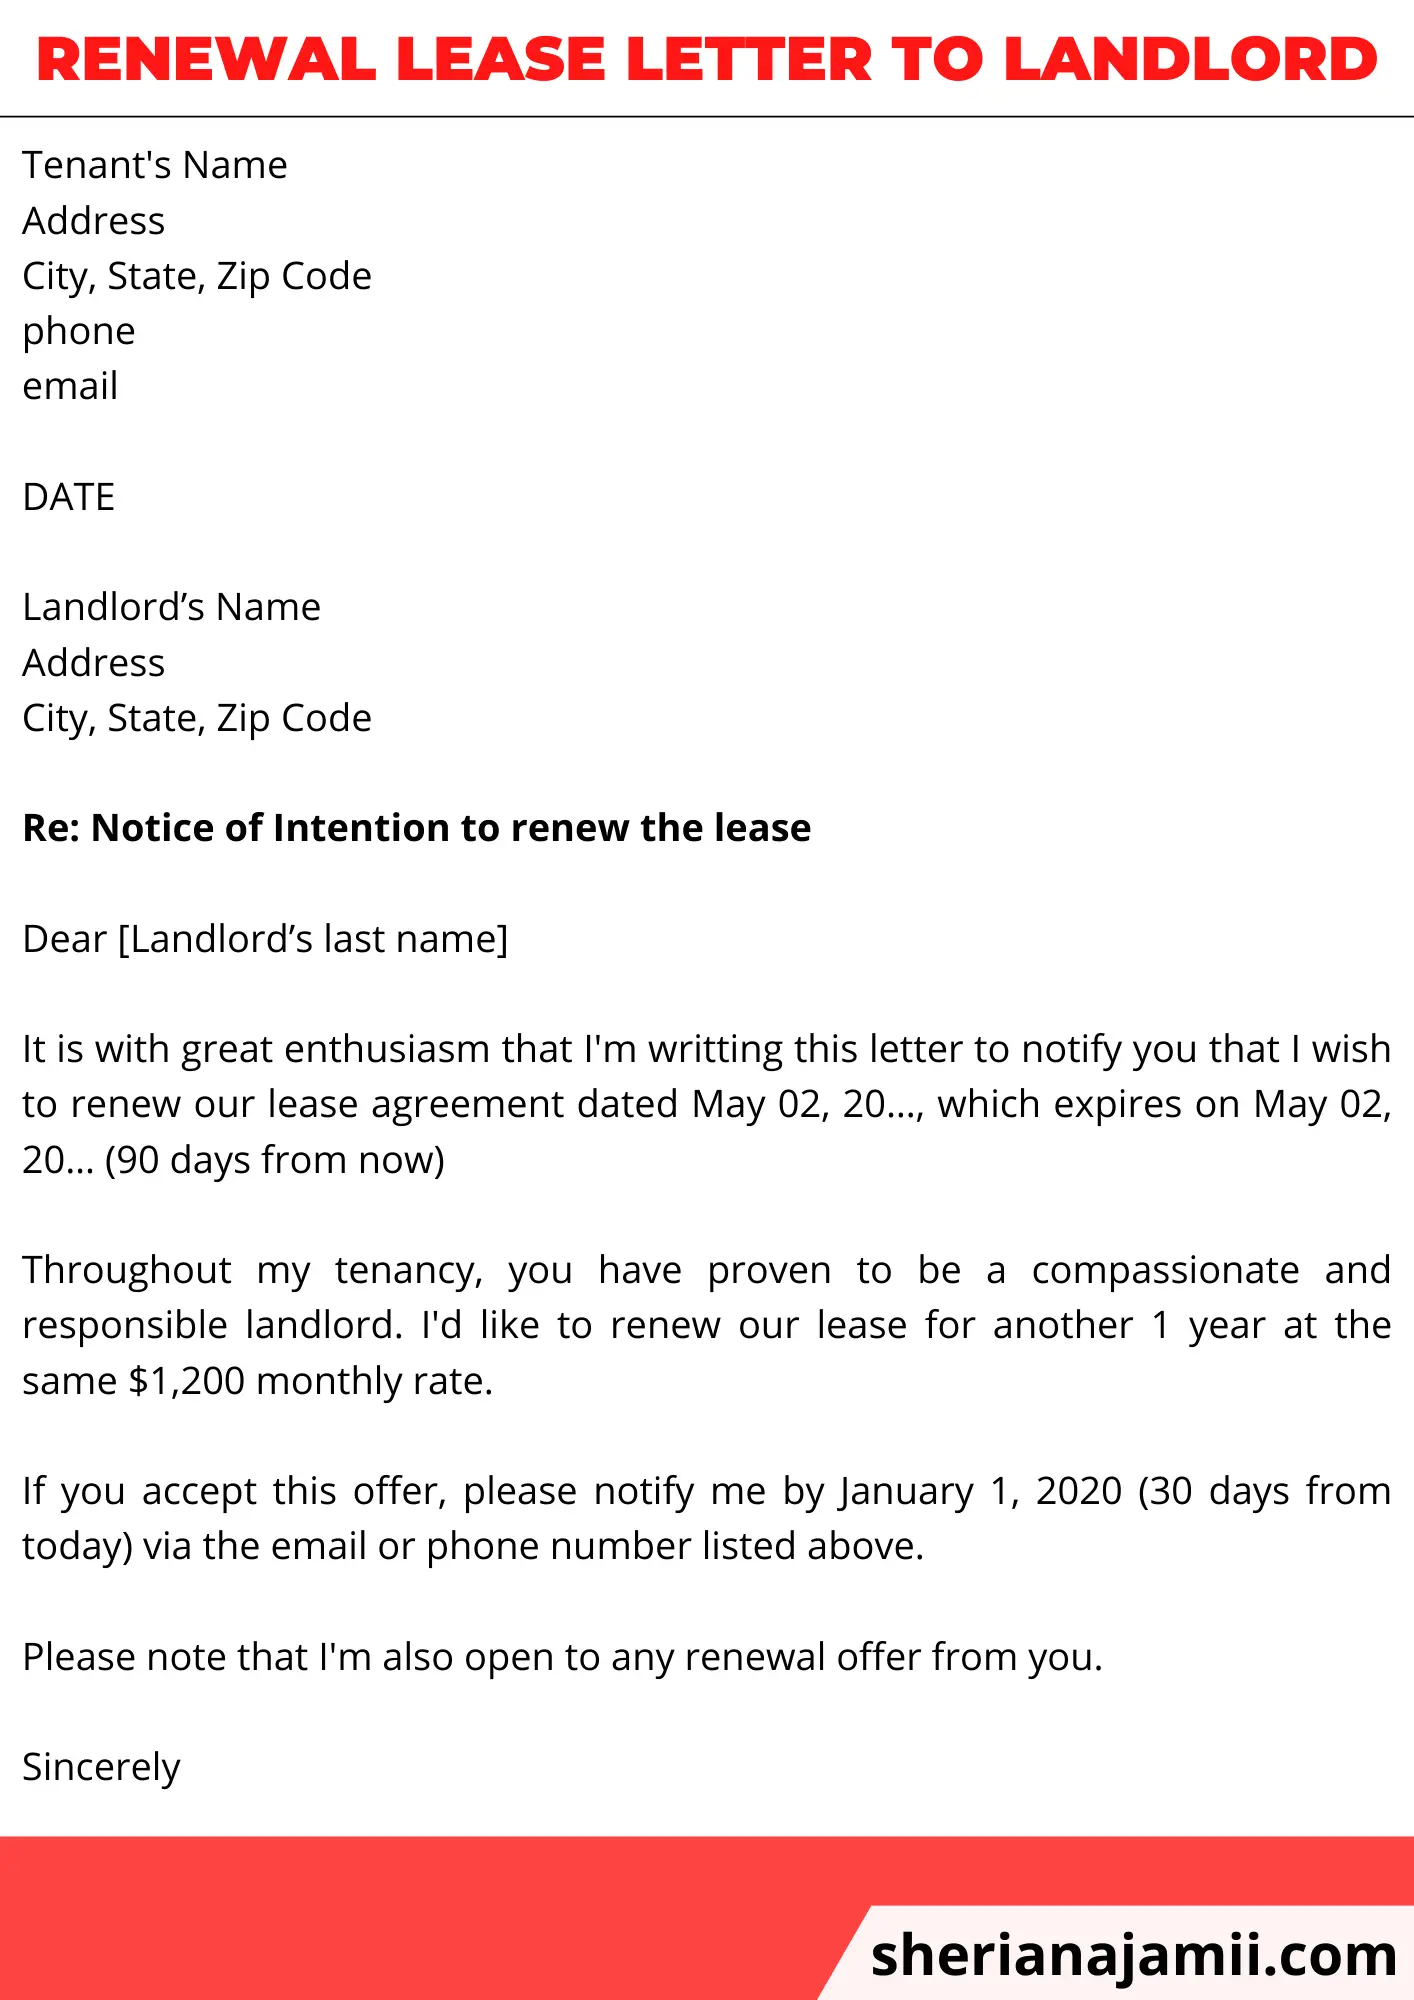 Renewal lease letter to landlord, Renewal lease letter to landlord sample